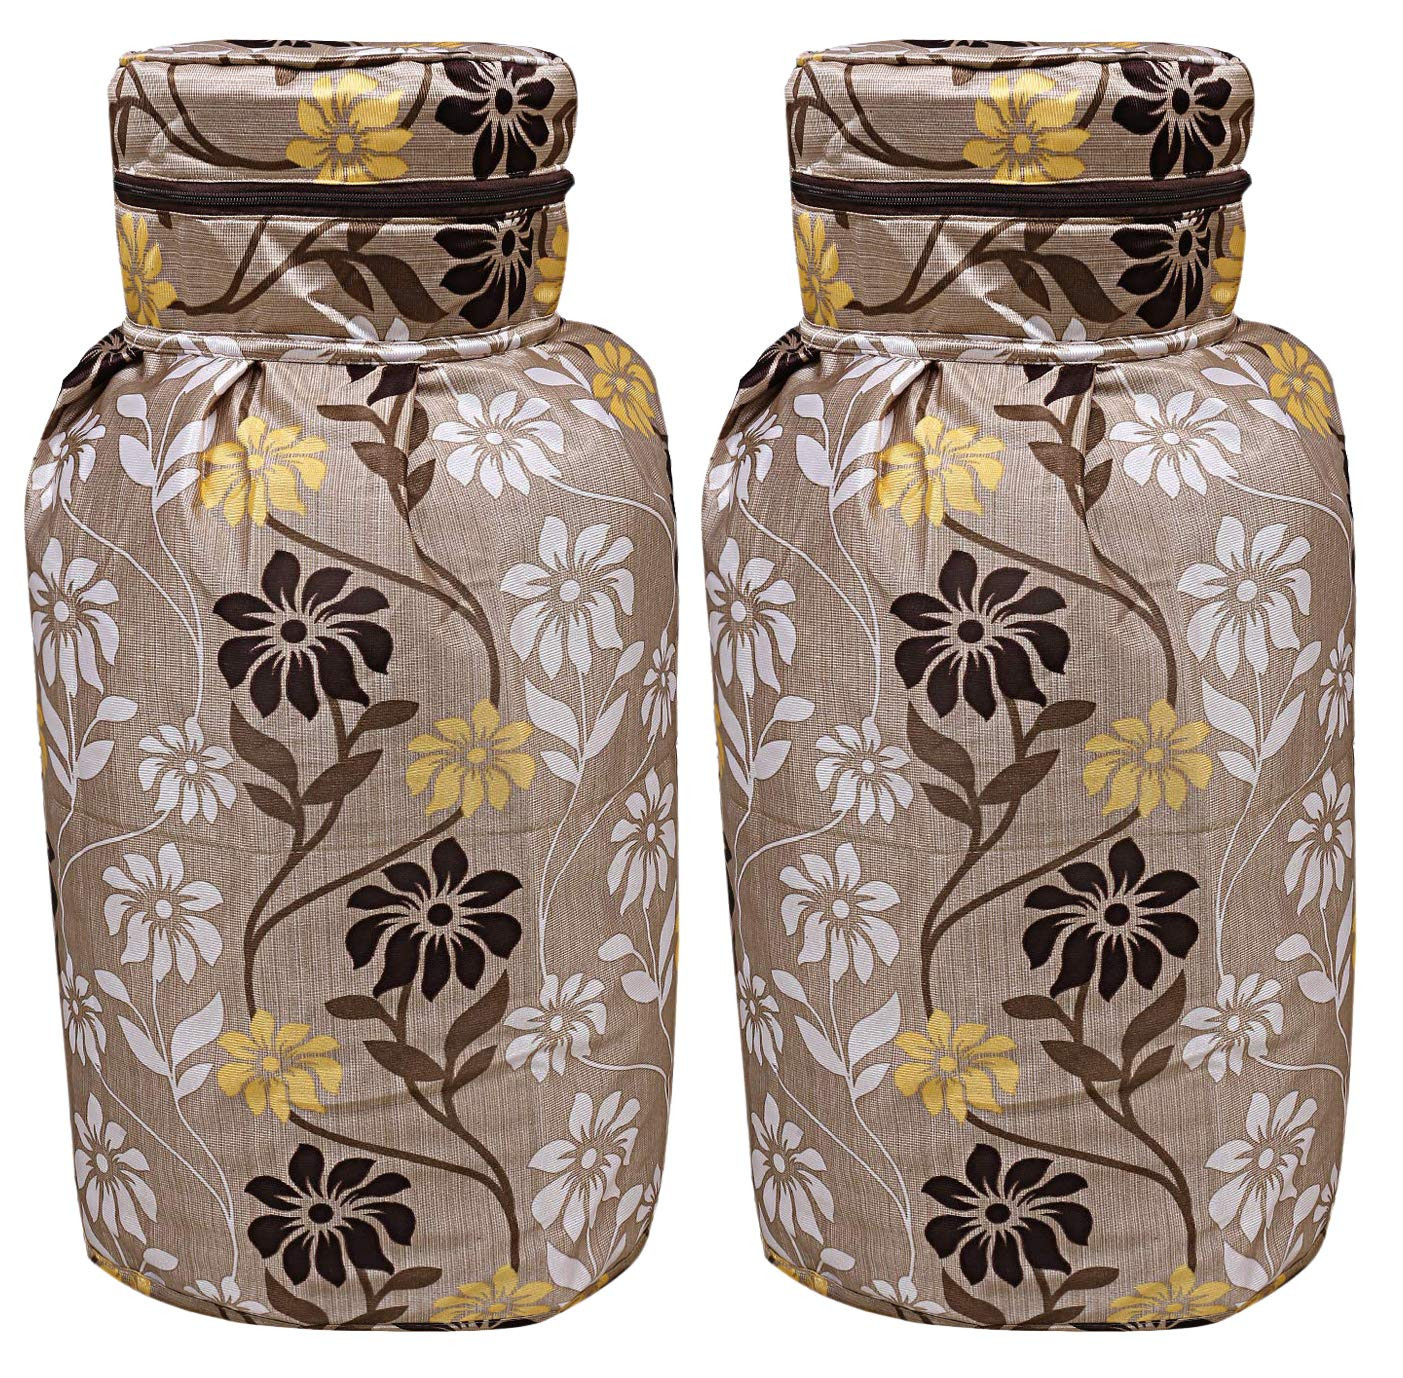 Kuber Industries Polyester Floral Print Zippered Propane Tank Cover/LPG Gas Cylinder Cover (Green)-Pack of 2-KUBMART15489